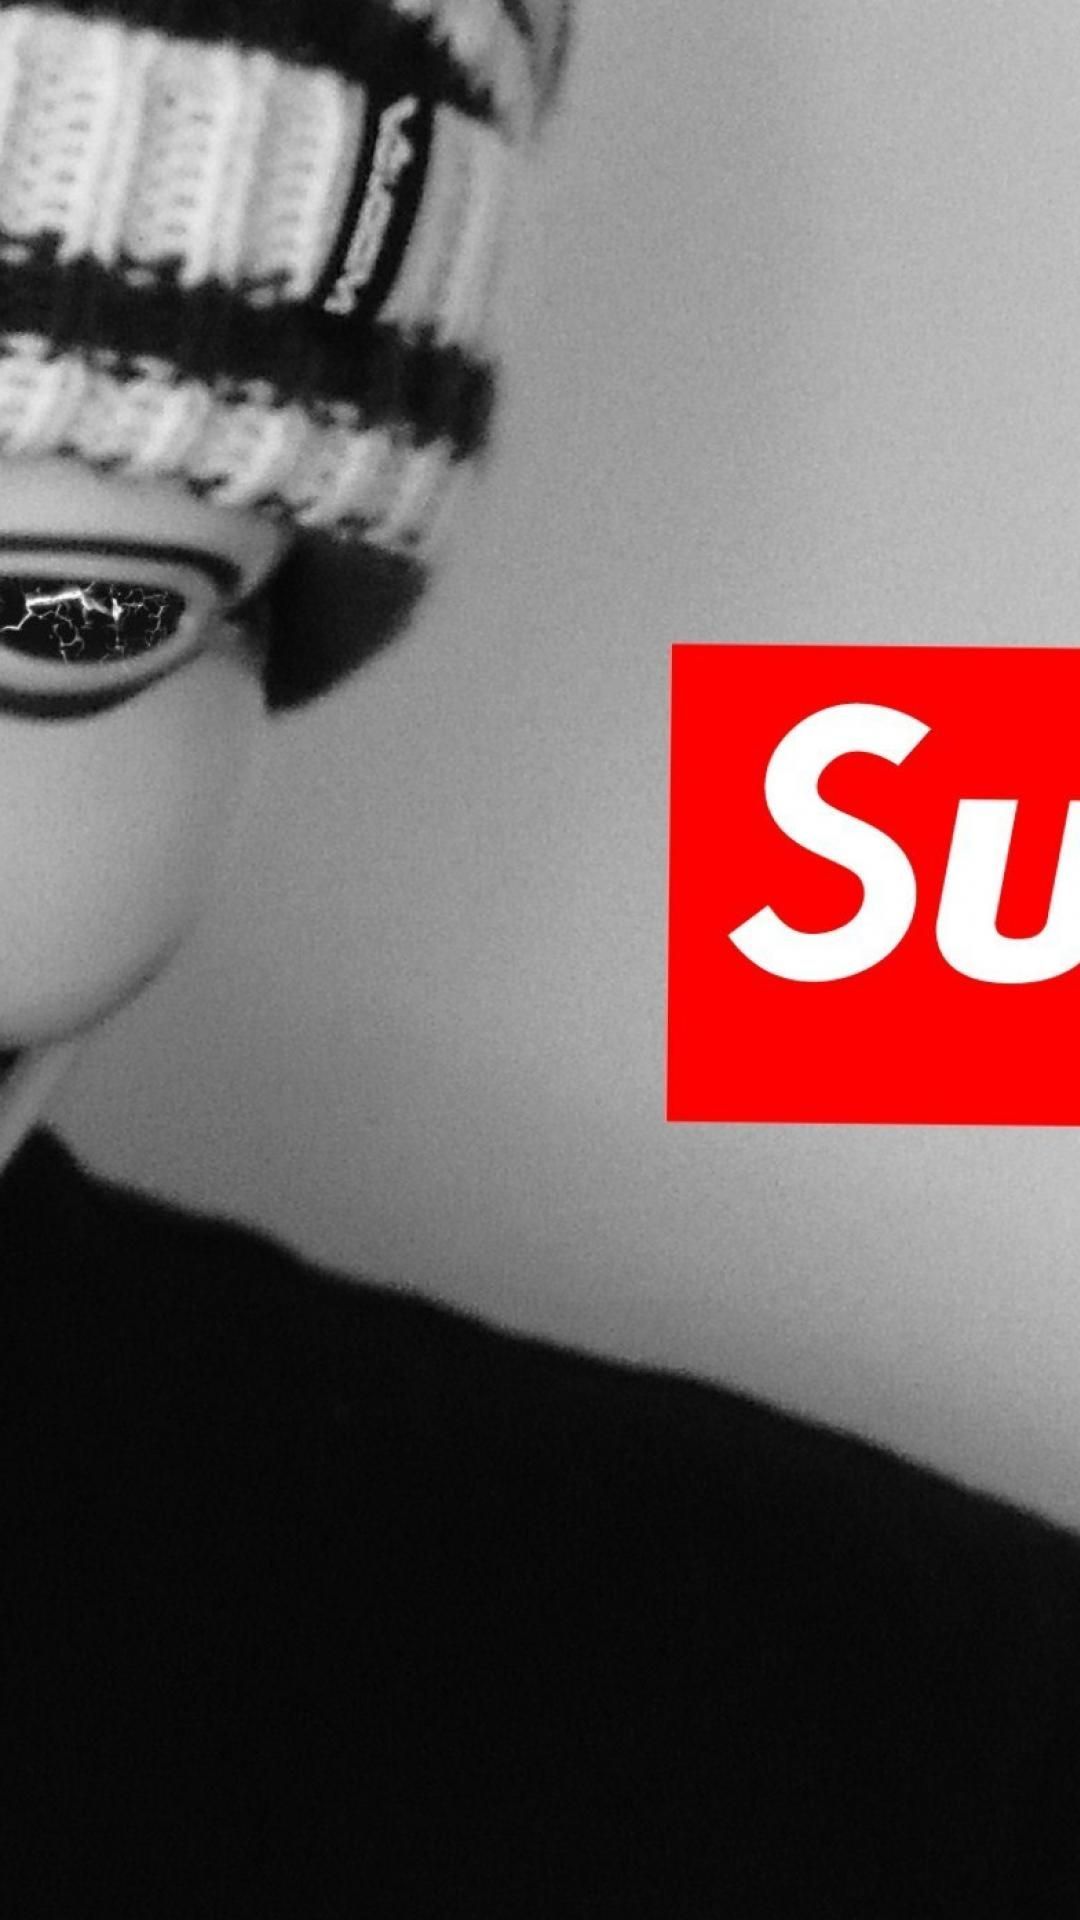 ✓ [245+] Supreme - Android, iPhone, Desktop HD Backgrounds / Wallpapers  (1080p, 4k) (2023)